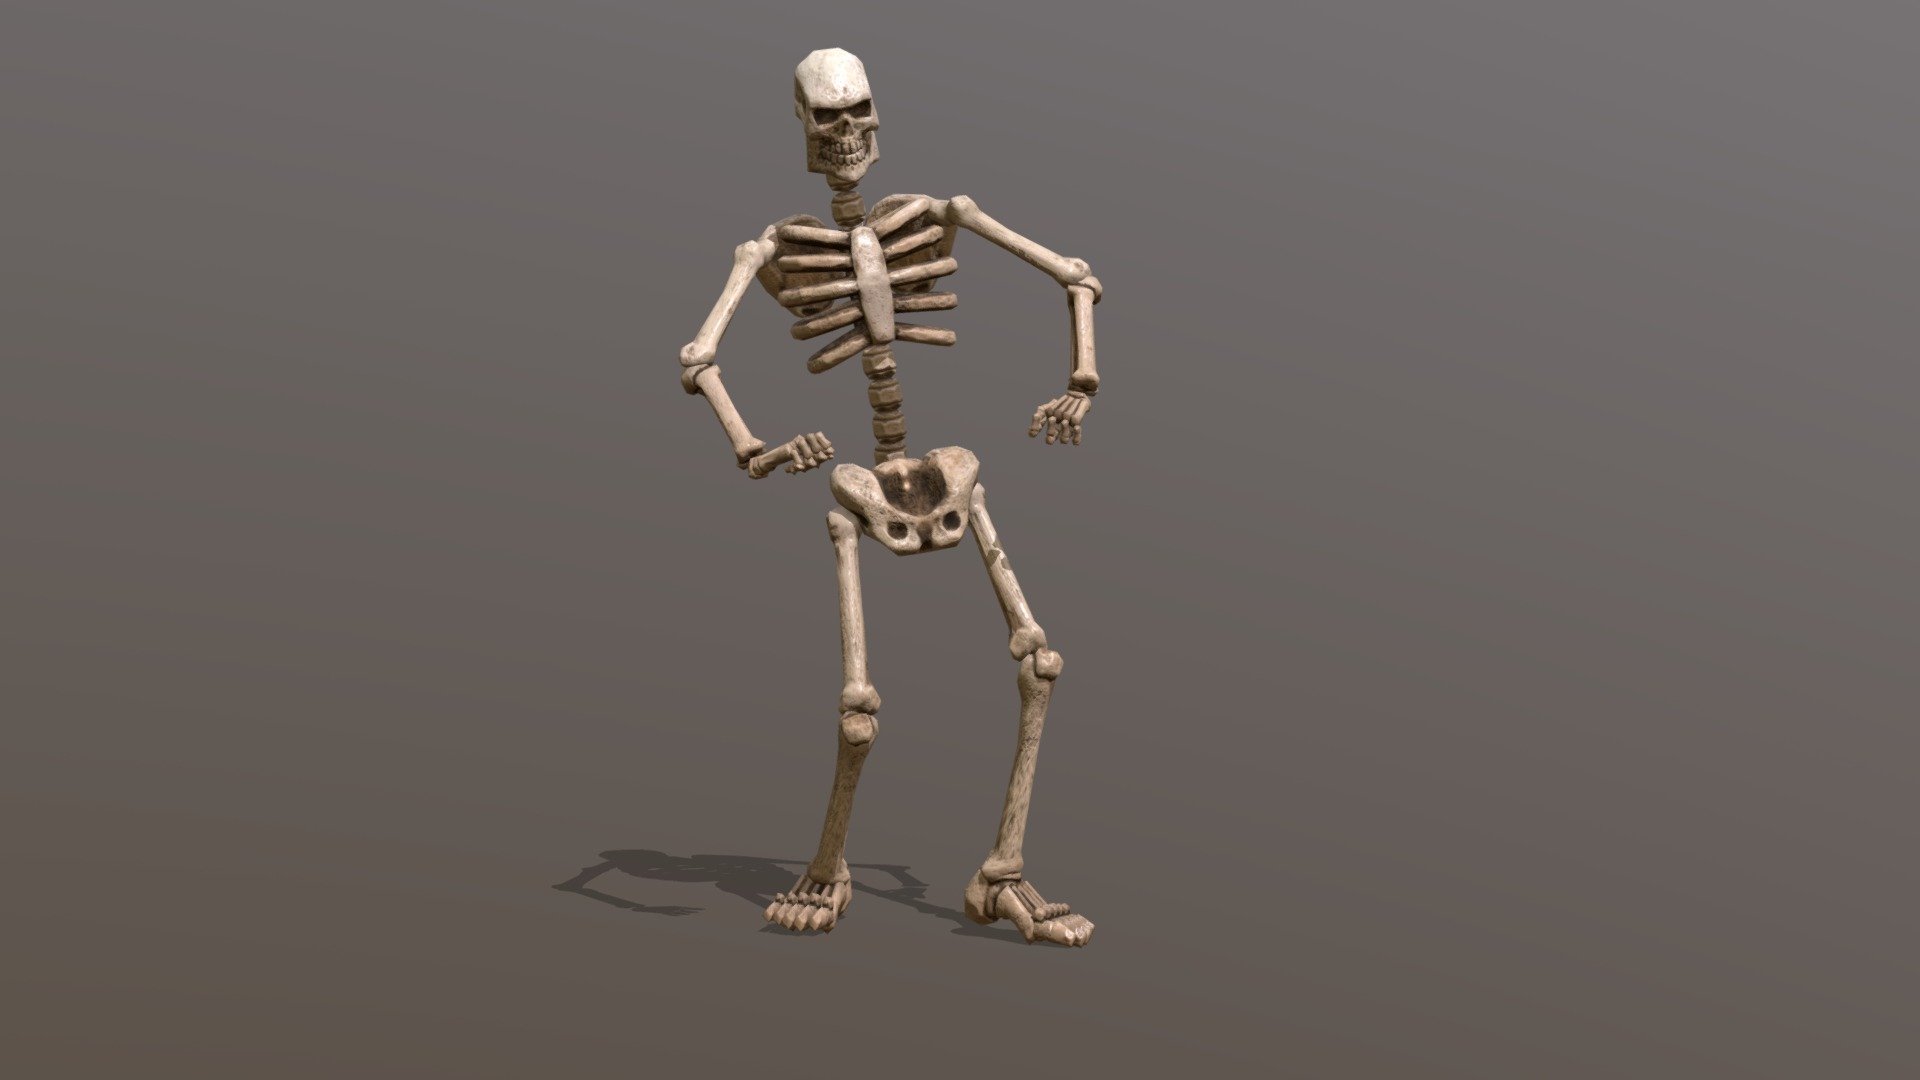 Just a little fun with a skelly I made for a game I'm working on!

Check out you YouTube Channel for more creative works of mine:
www.youtube.com/c/VidovicArts101 - Twist Skelly Dance - 3D model by VidovicArts (@oshjavid) 3d model